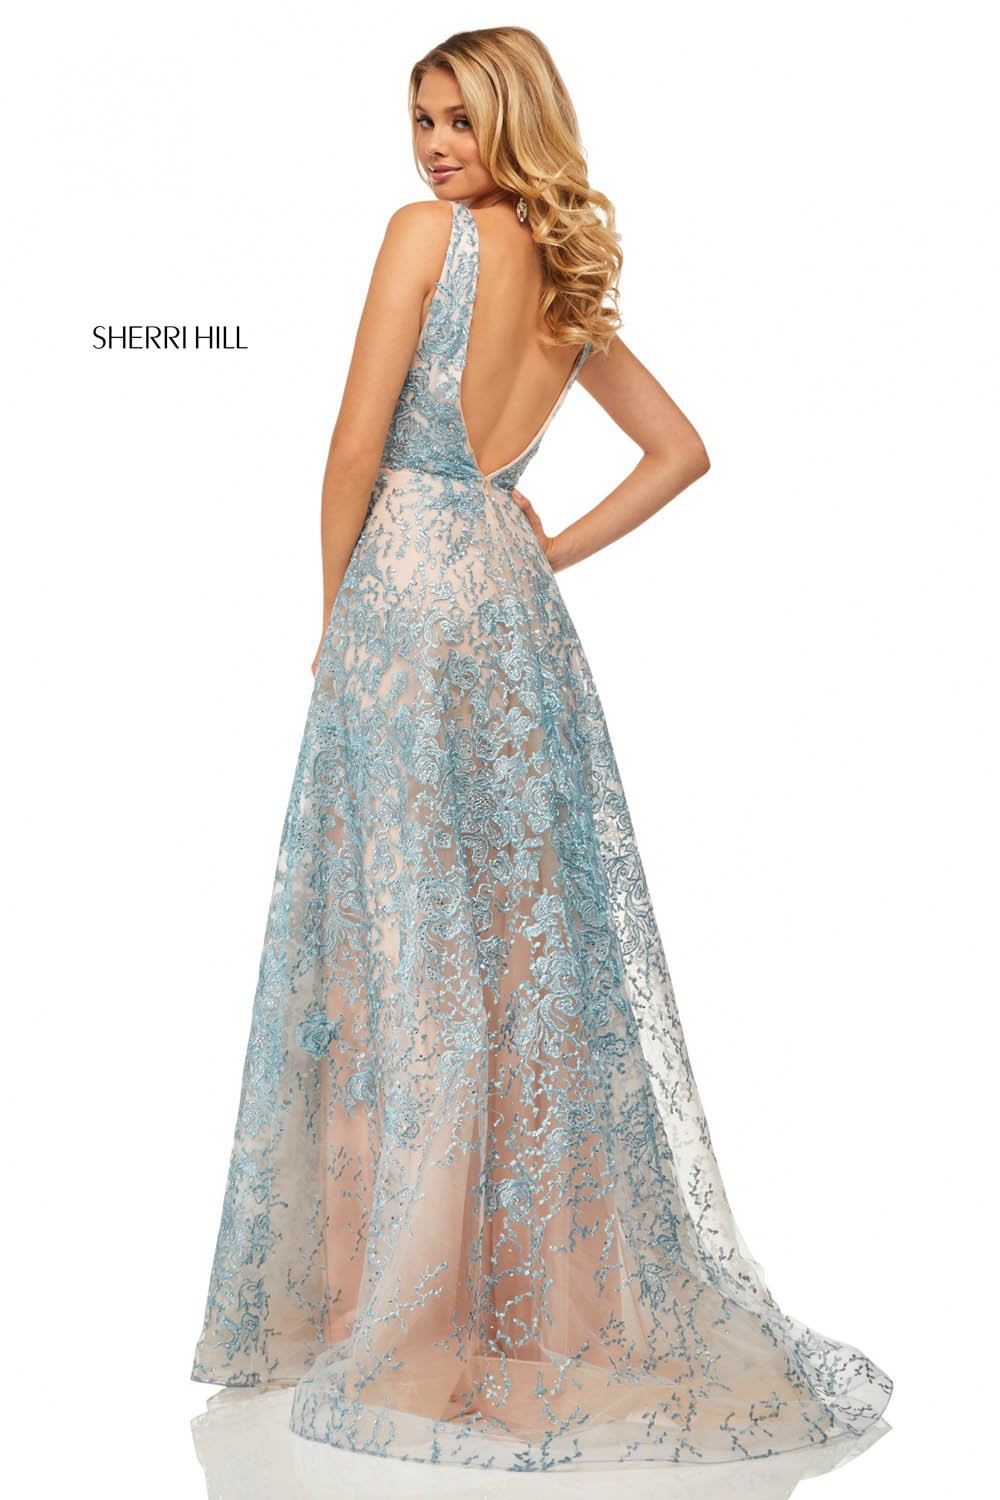 Sherri Hill 52877 dress images in these colors: Blush Nude, Ivory, Light Blue Nude.